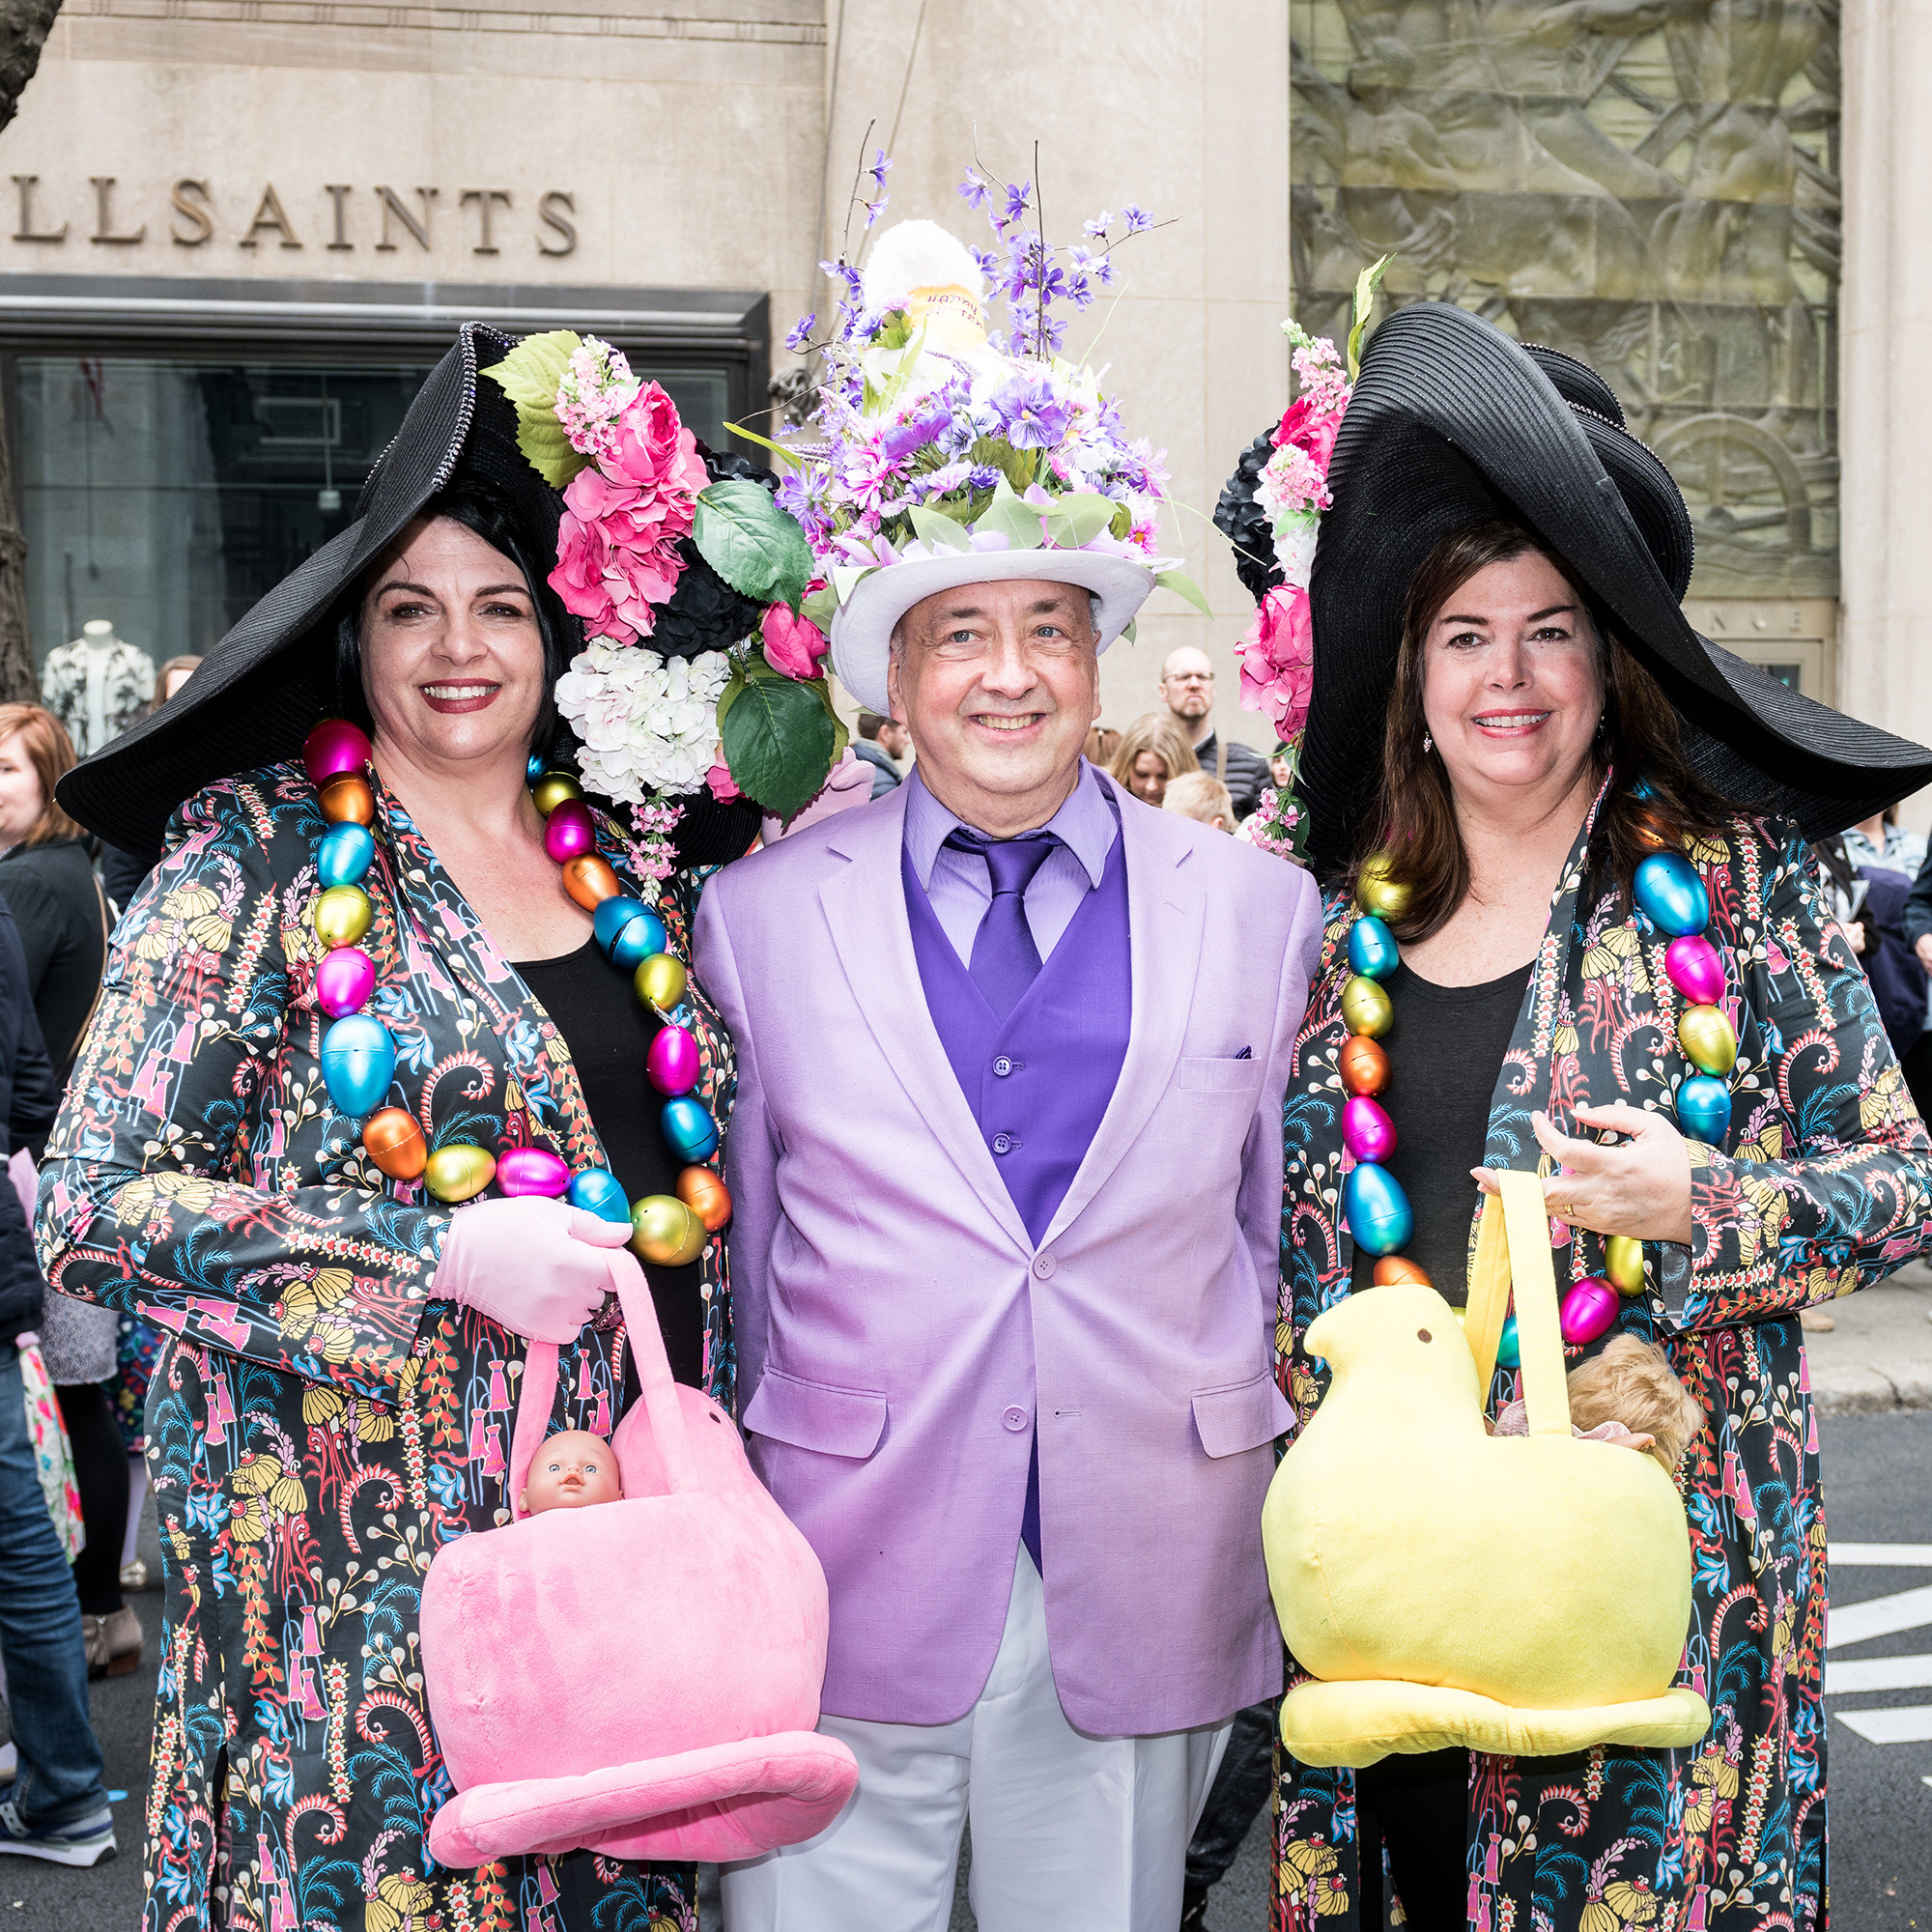 Two women in black hats and necklaces made of Easter eggs carrying baskets that look like peeps pose with a man in a purple suit 